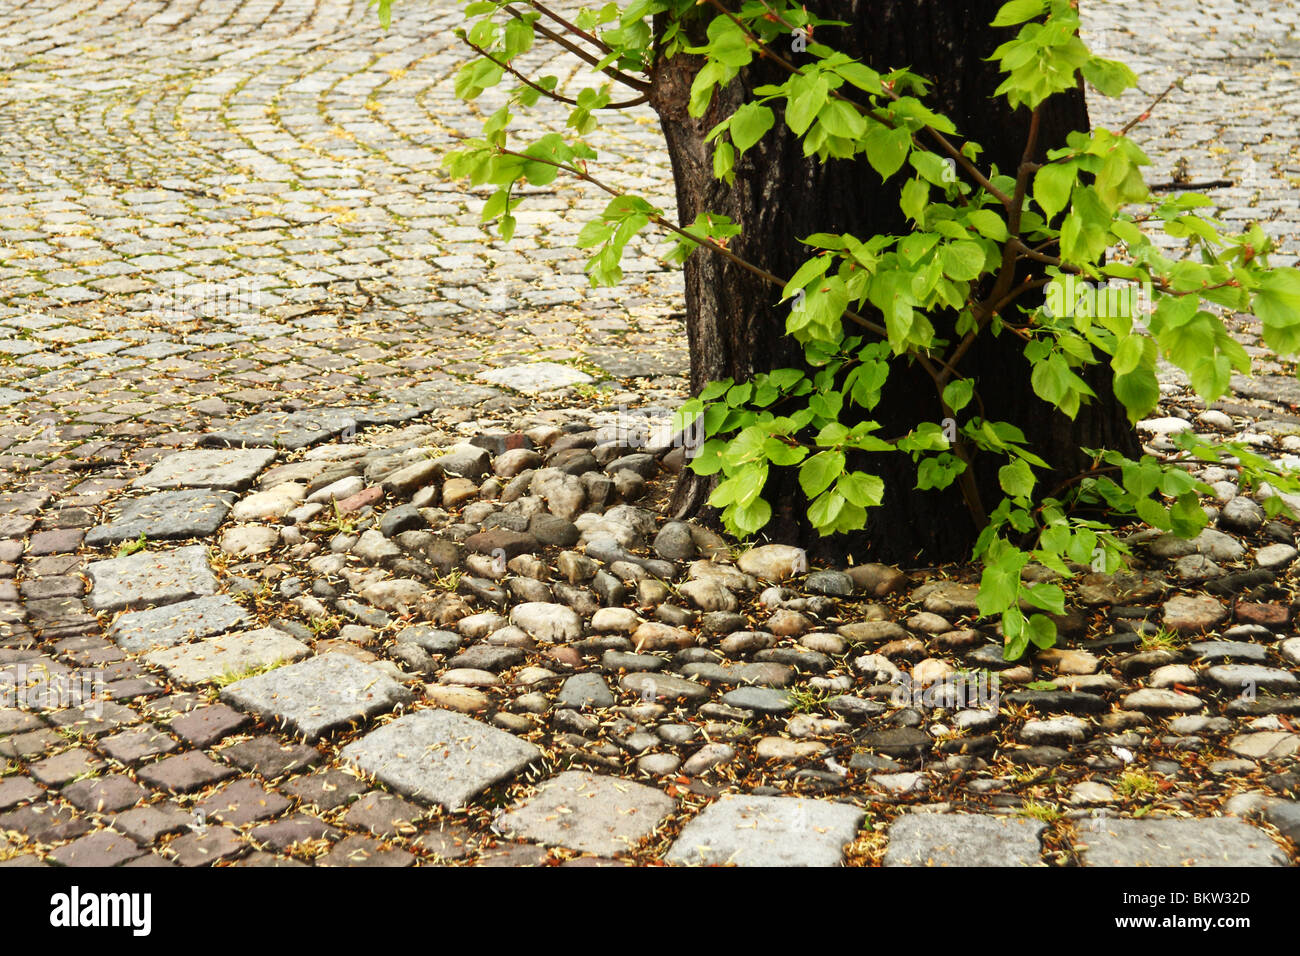 Tree trunk and fresh leaves in a city pavement. Stock Photo